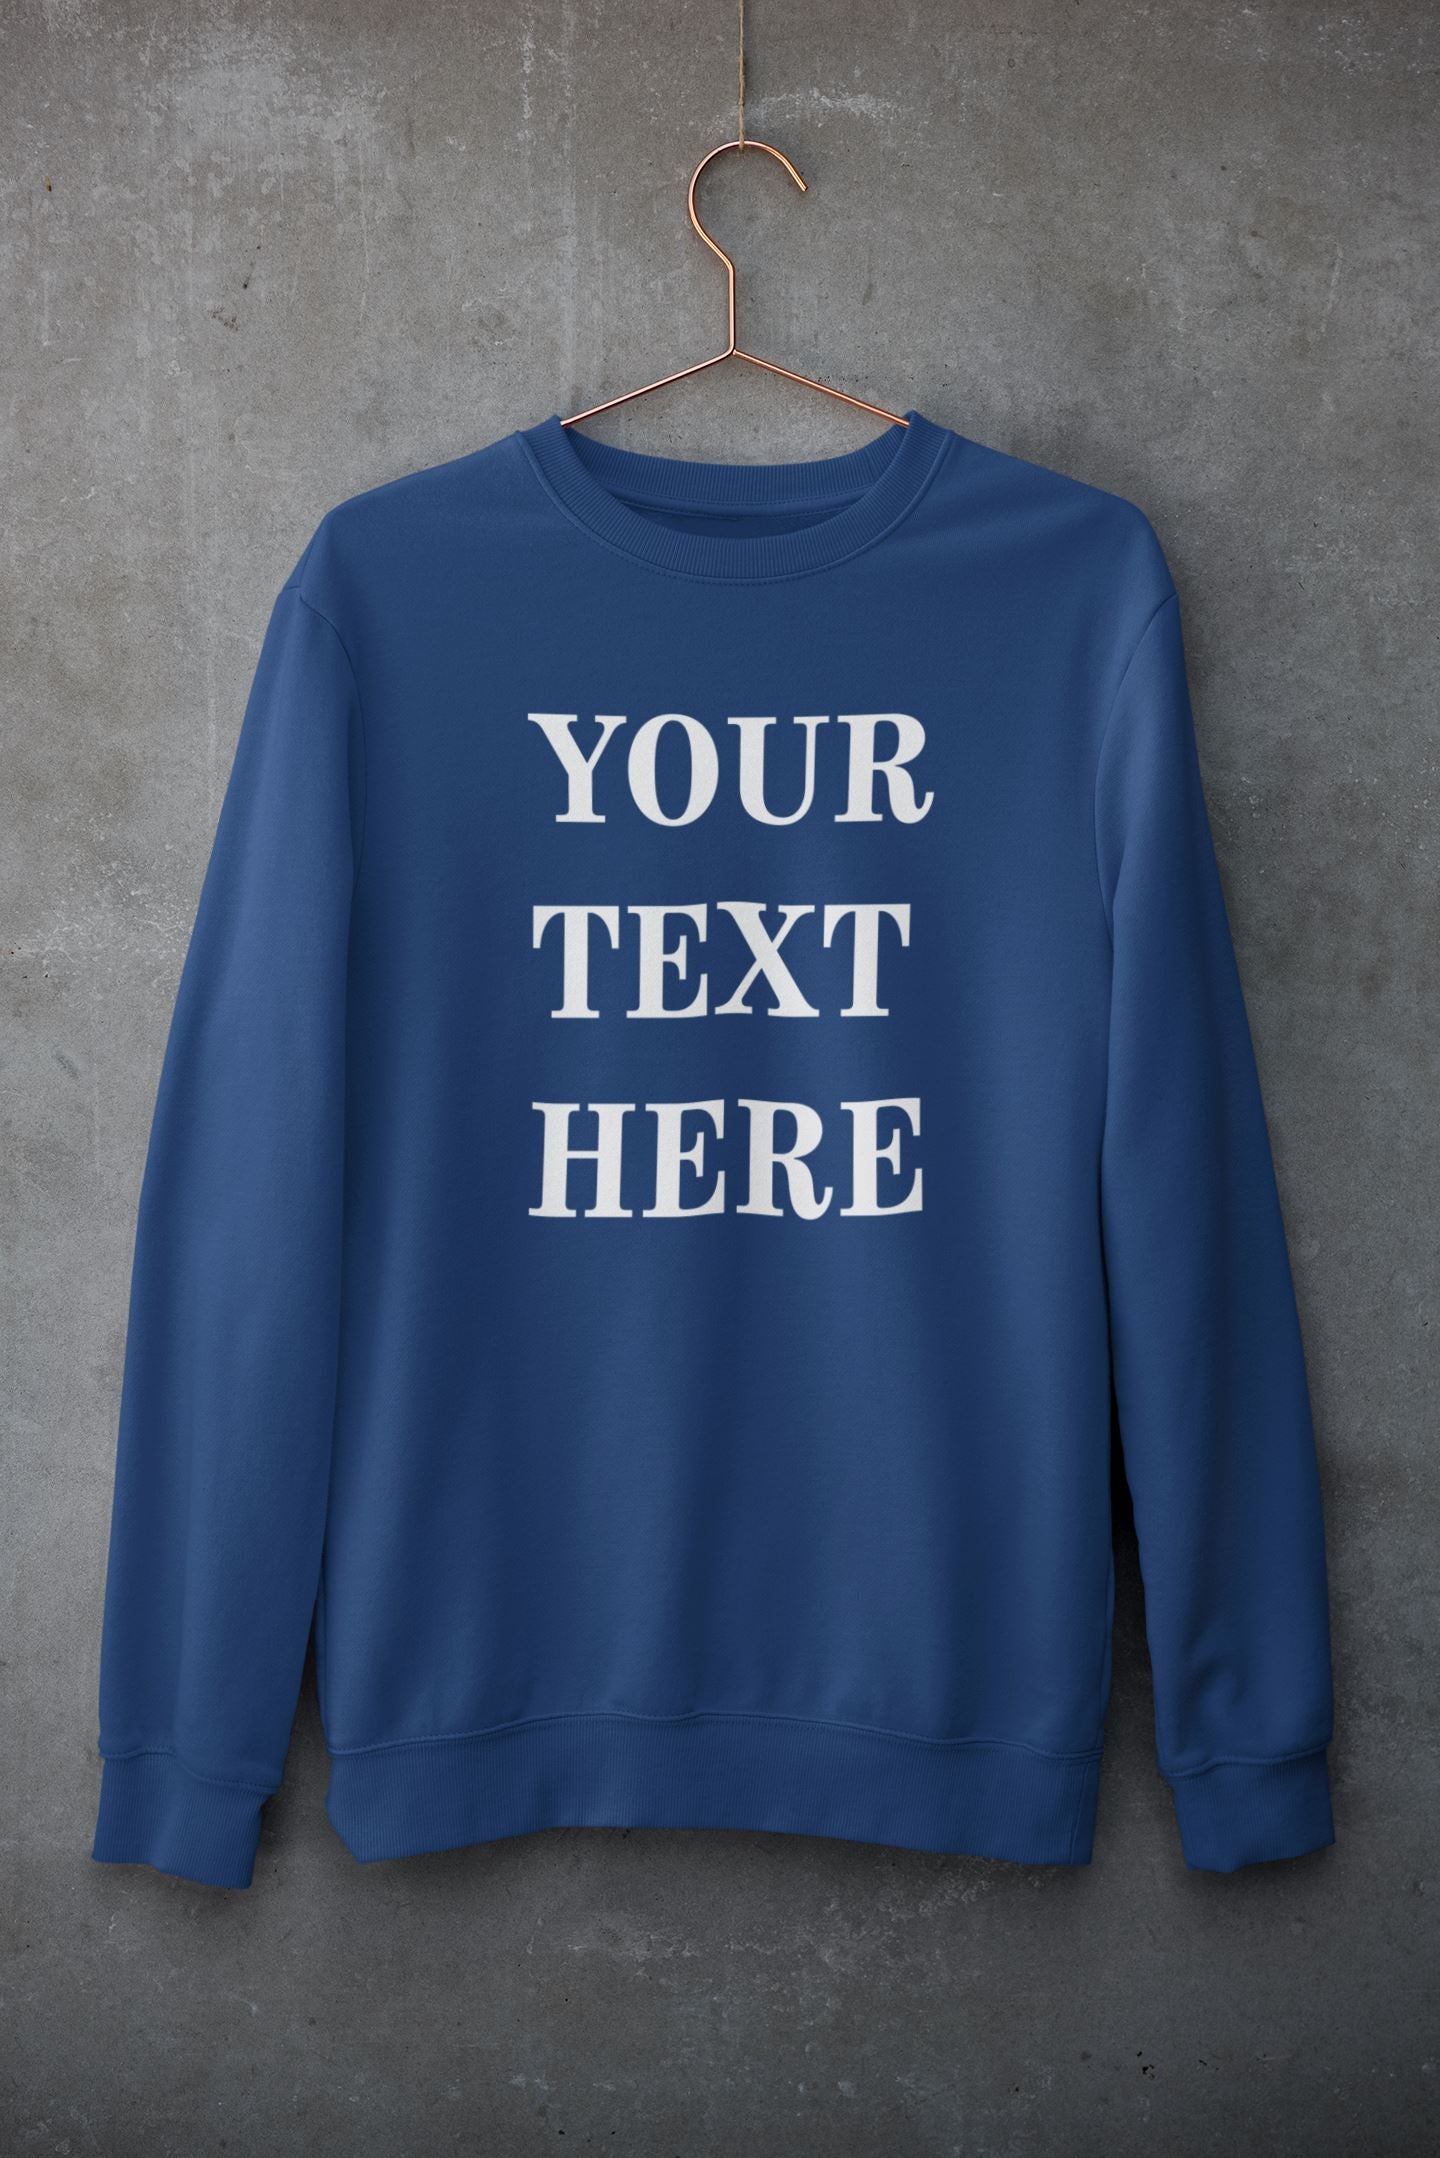 Personalised Sweatshirts with your Text